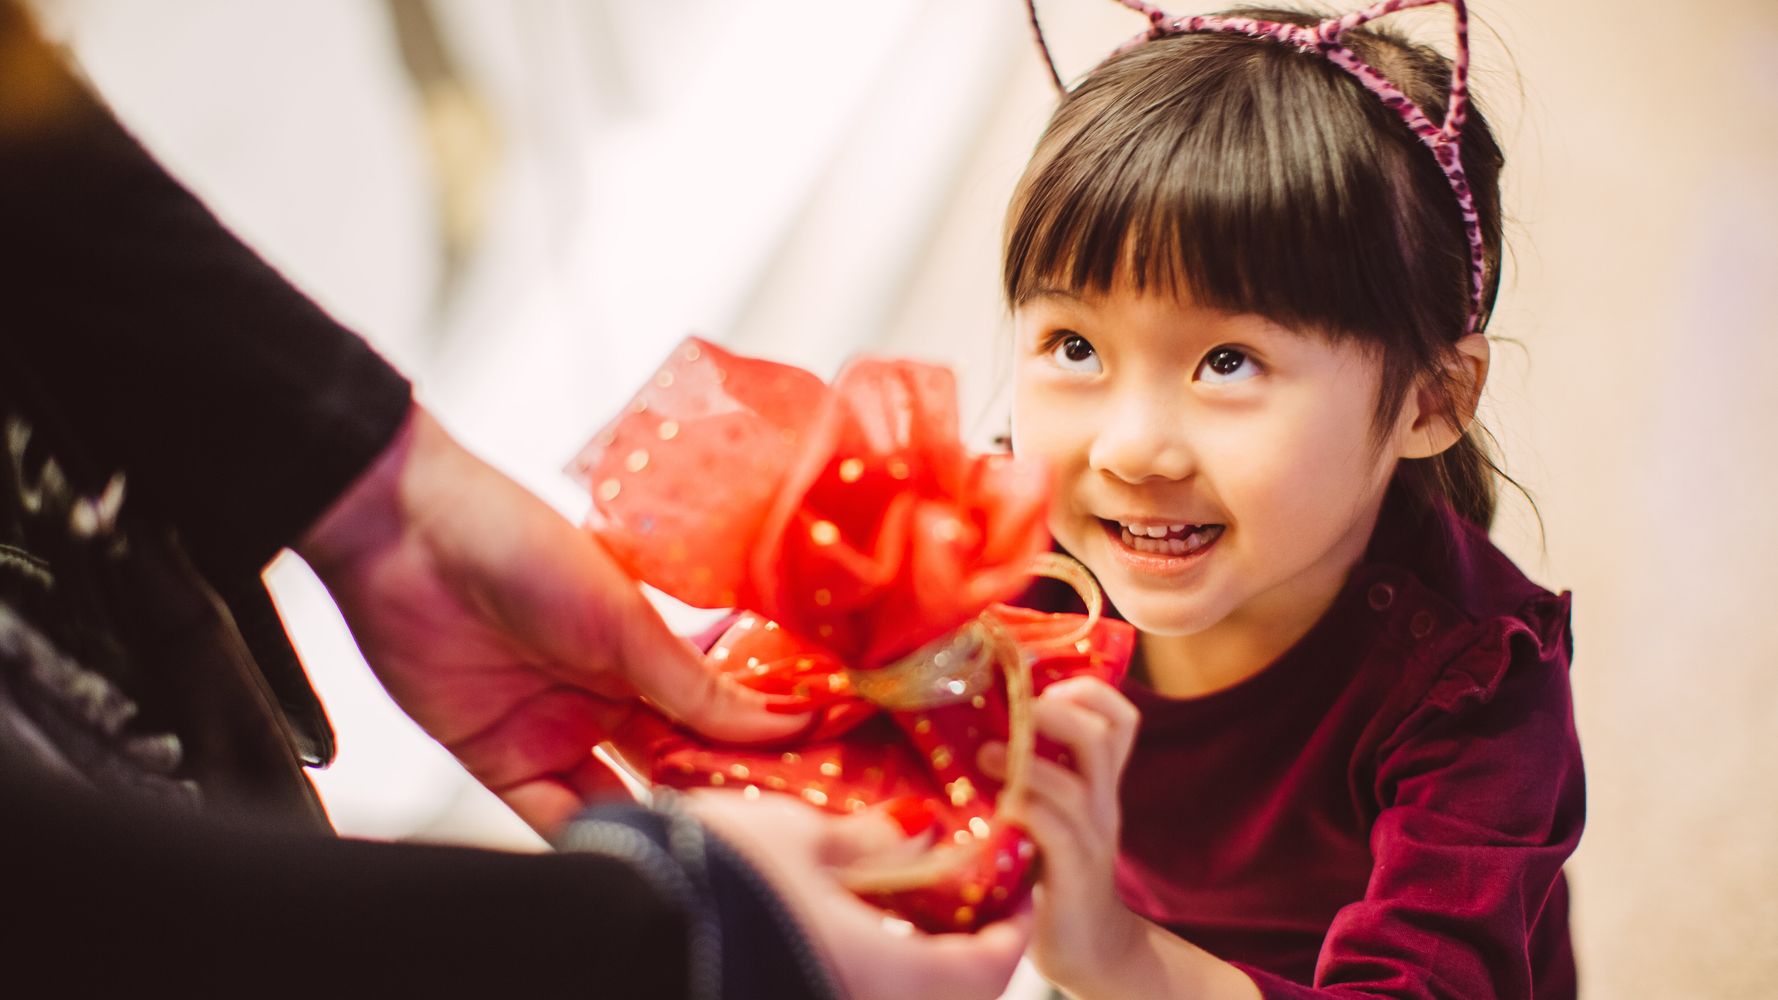 How to Teach Kids to Politely Receive a Gift